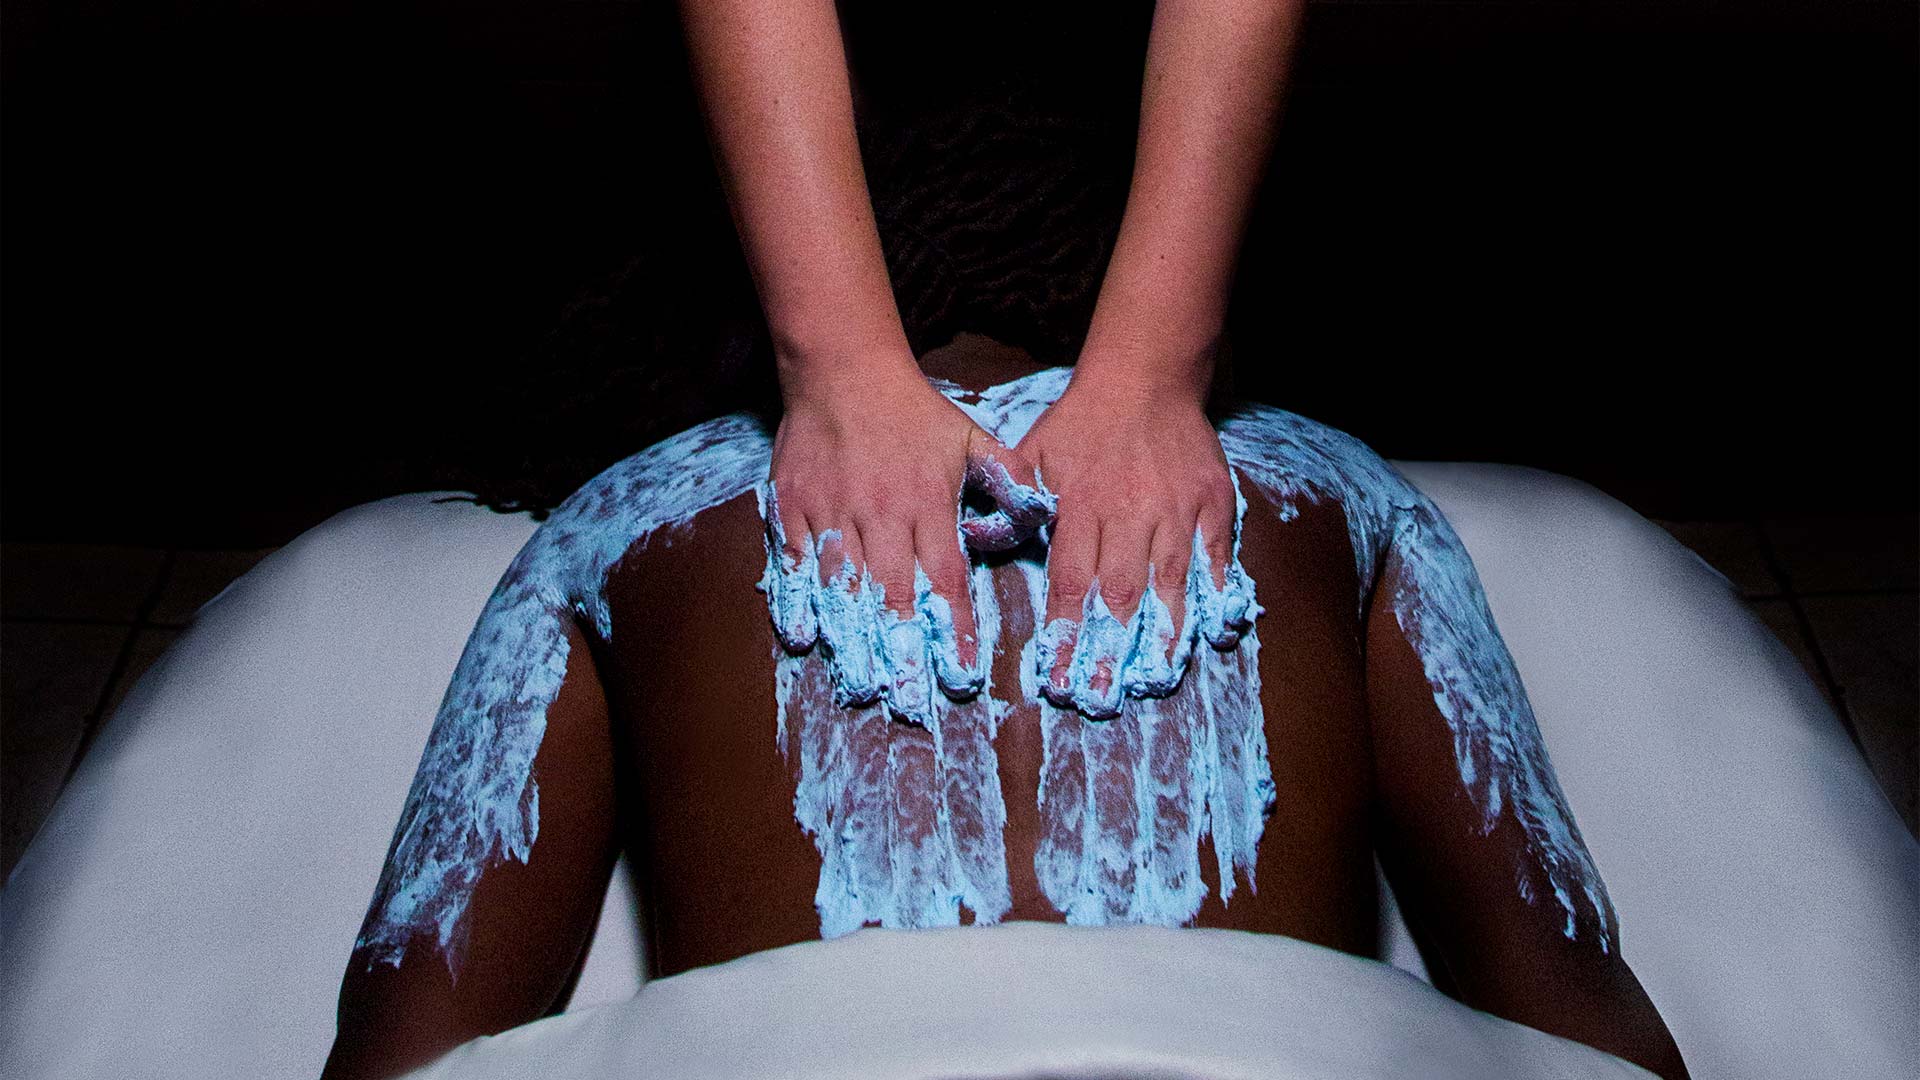 a person getting a spa treatment. They are laying face down and a are having a blue paste being applied to their back and arms.